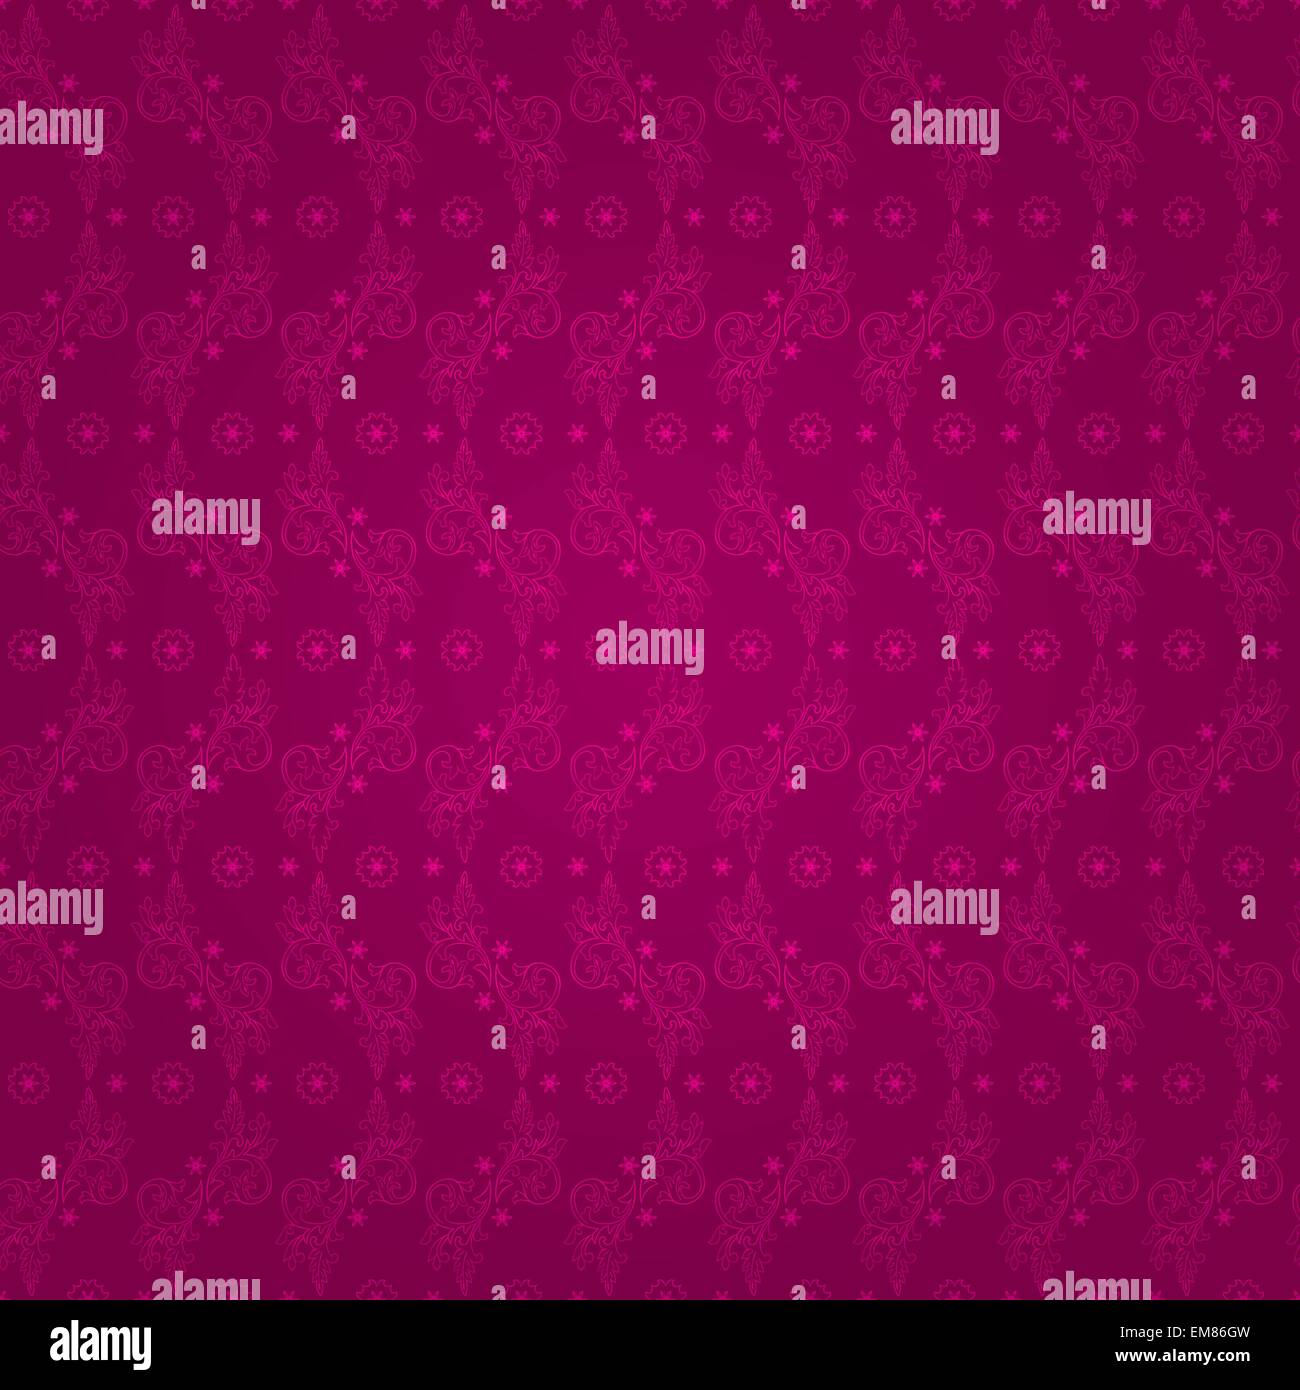 Floral vintage seamless pattern on a pink background Stock Vector